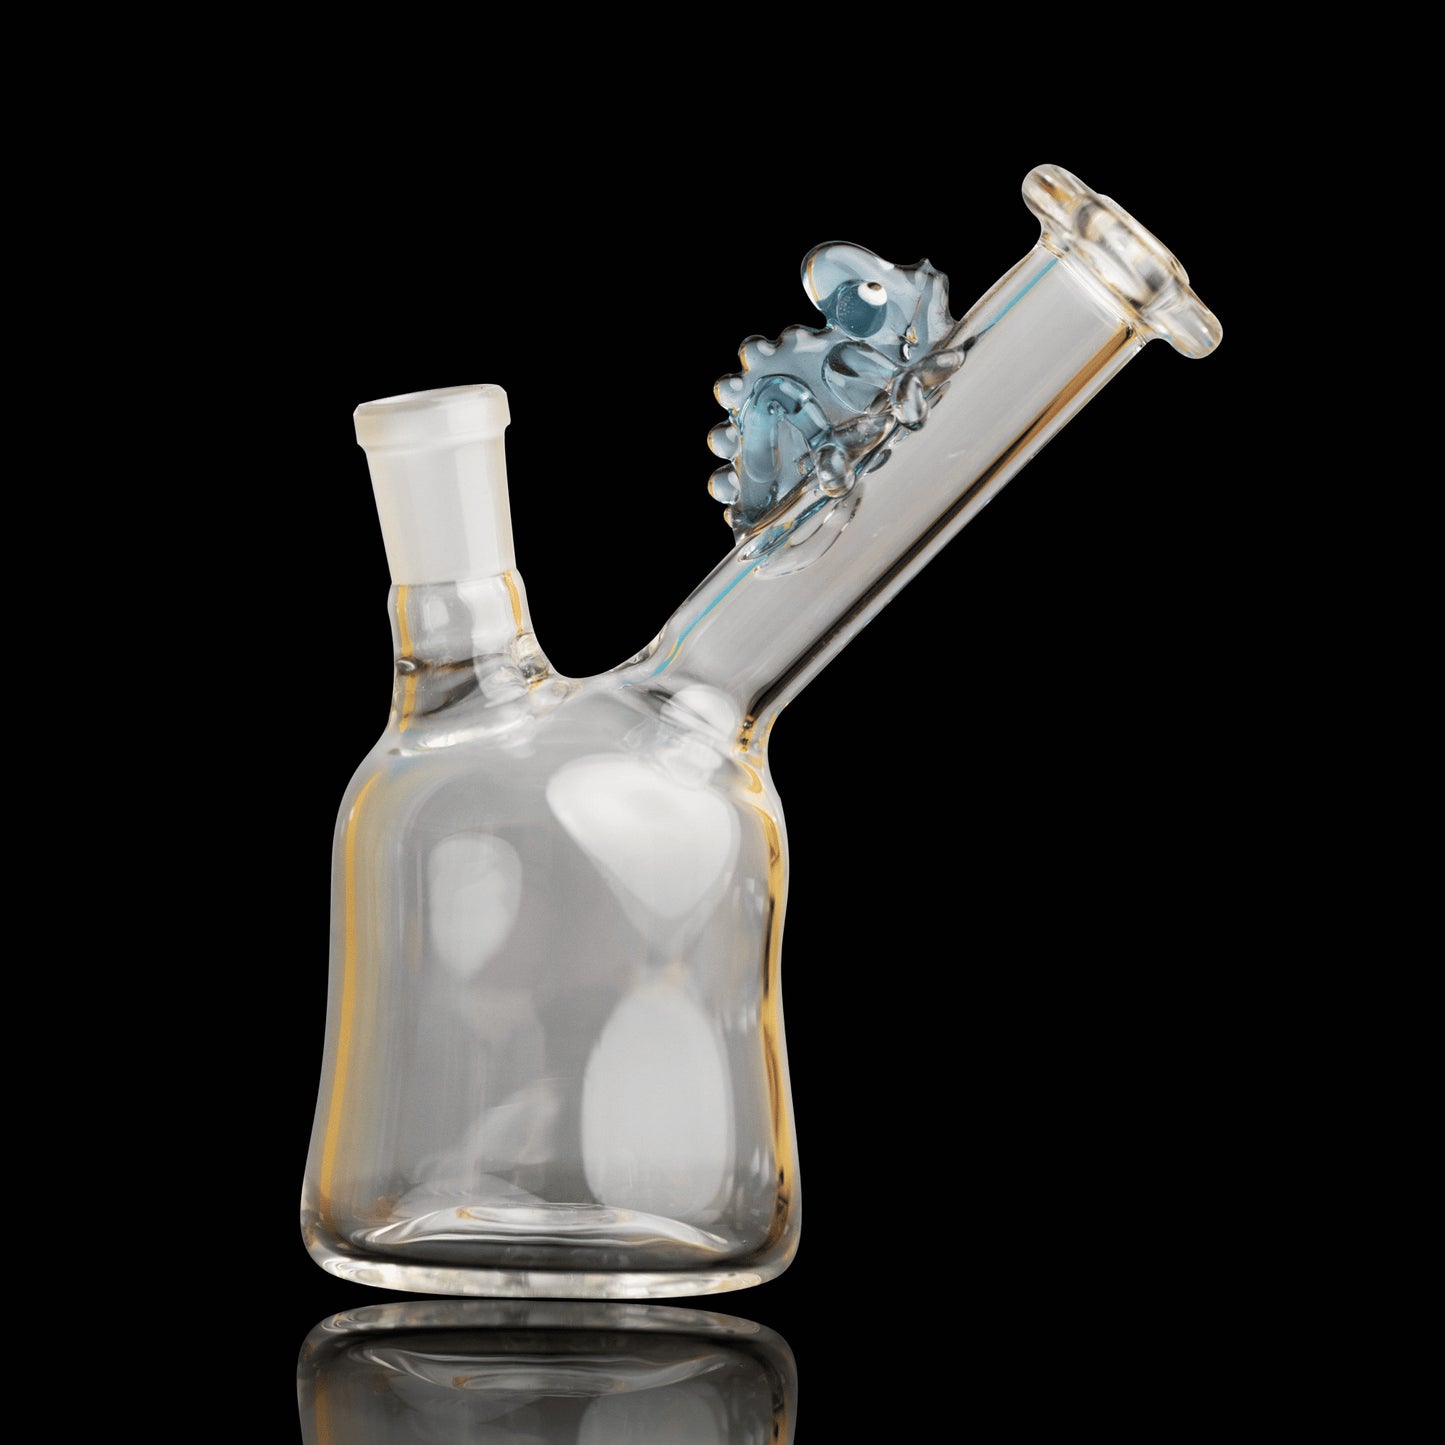 exquisite design of the Clear Rig w/ Blue Chameleon (F) by Willy That Glass Guy